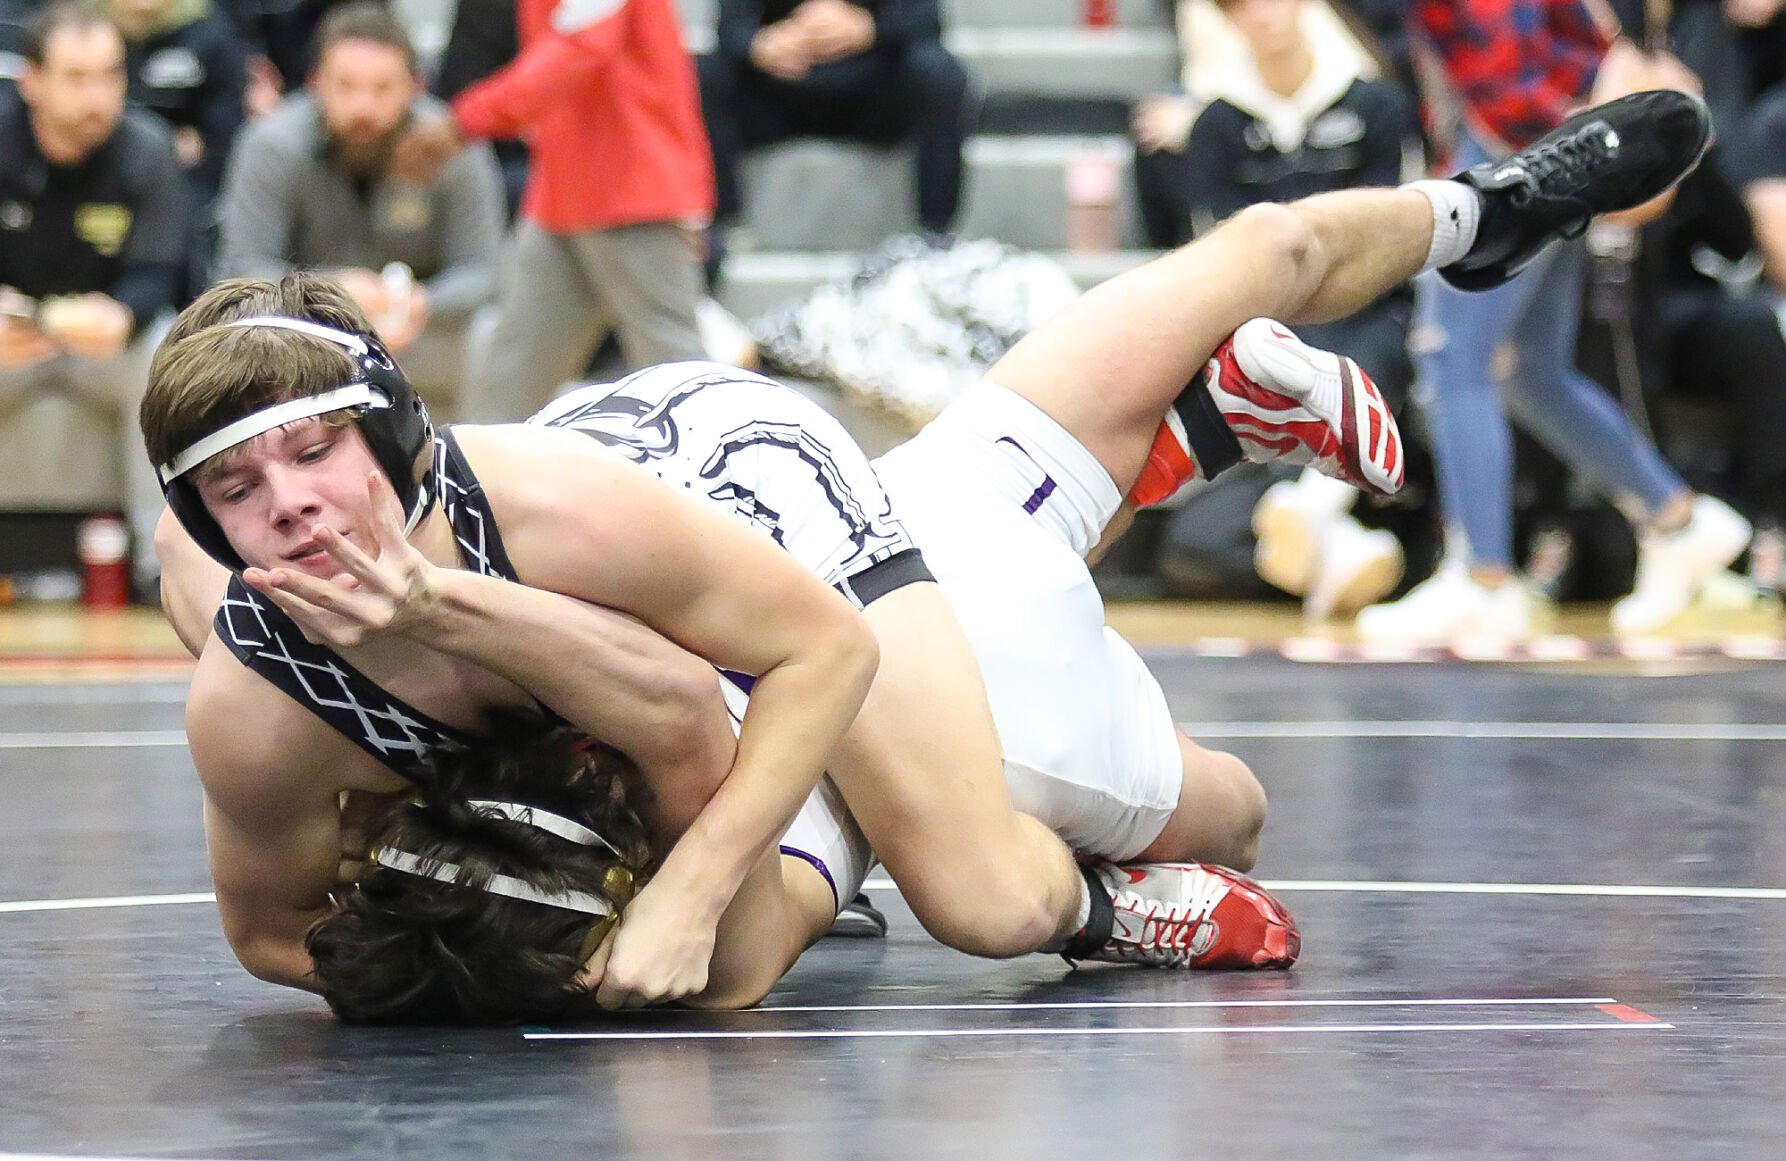 Boys wrestling spotlight Triads Crouch wastes no time on or off the